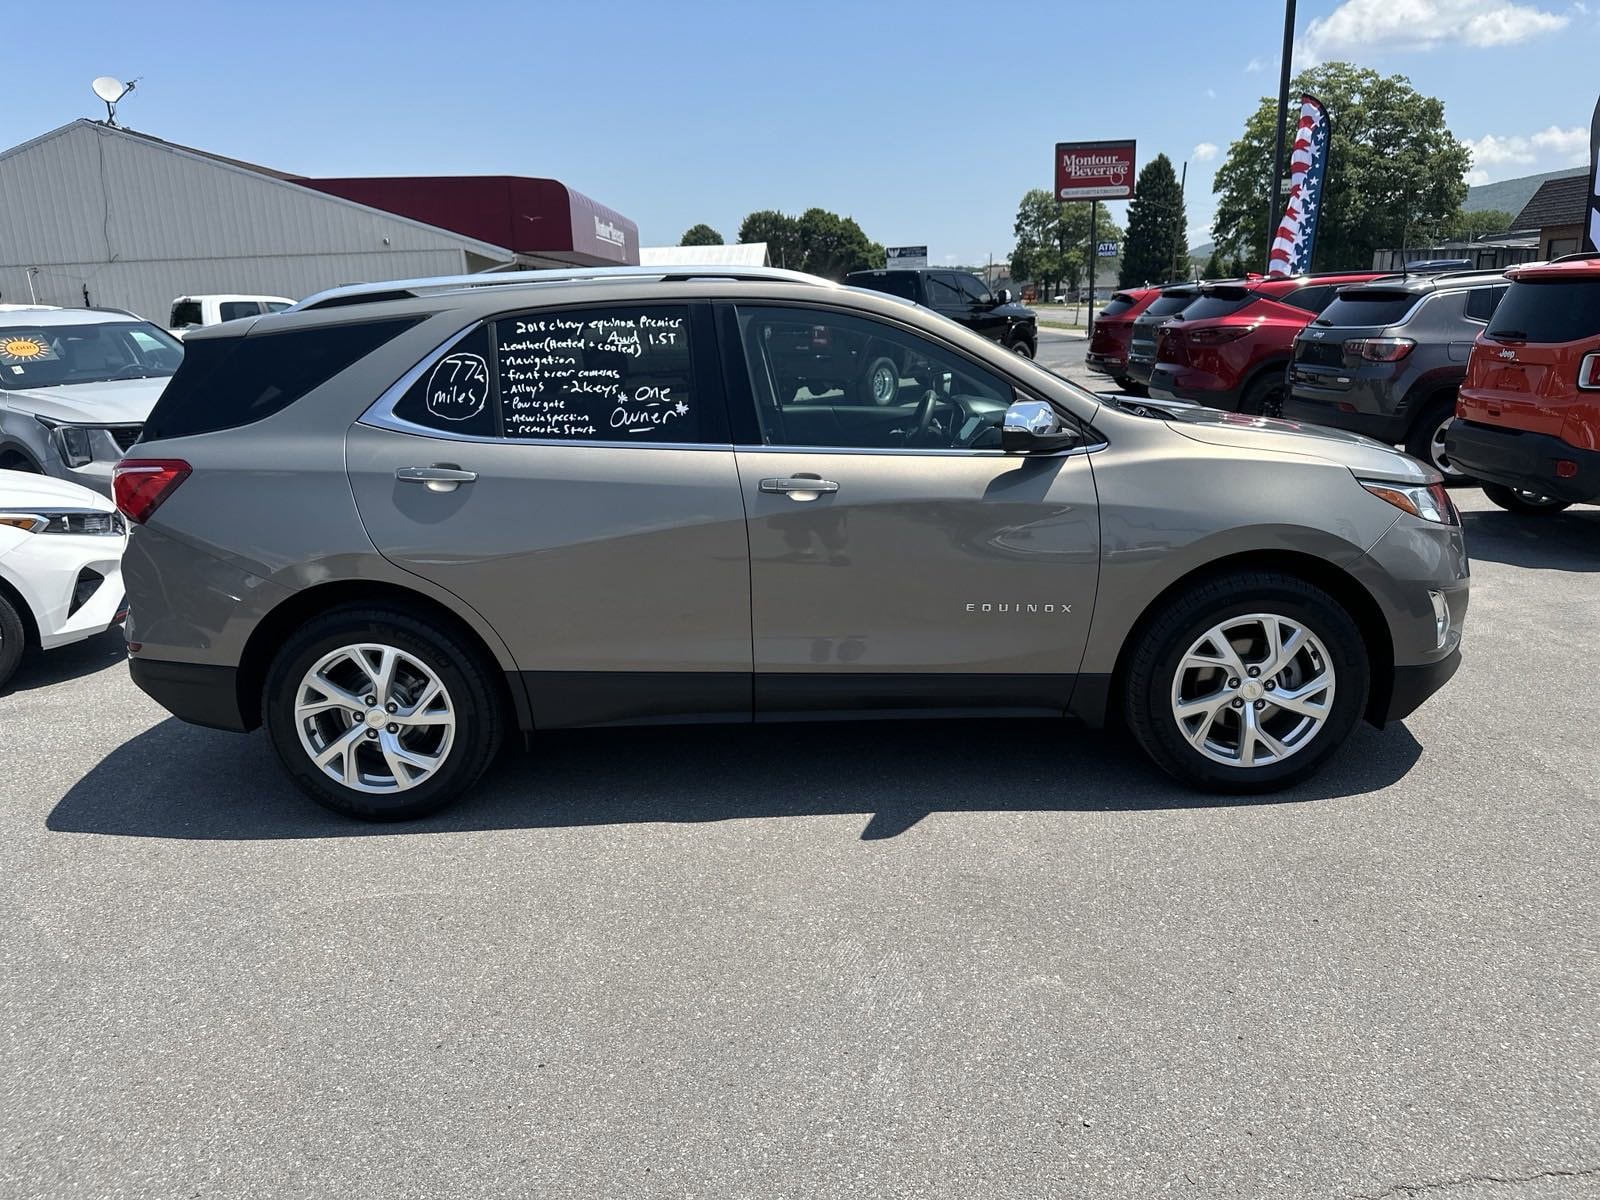 Used 2018 Chevrolet Equinox Premier with VIN 3GNAXVEV6JS550287 for sale in Montoursville, PA